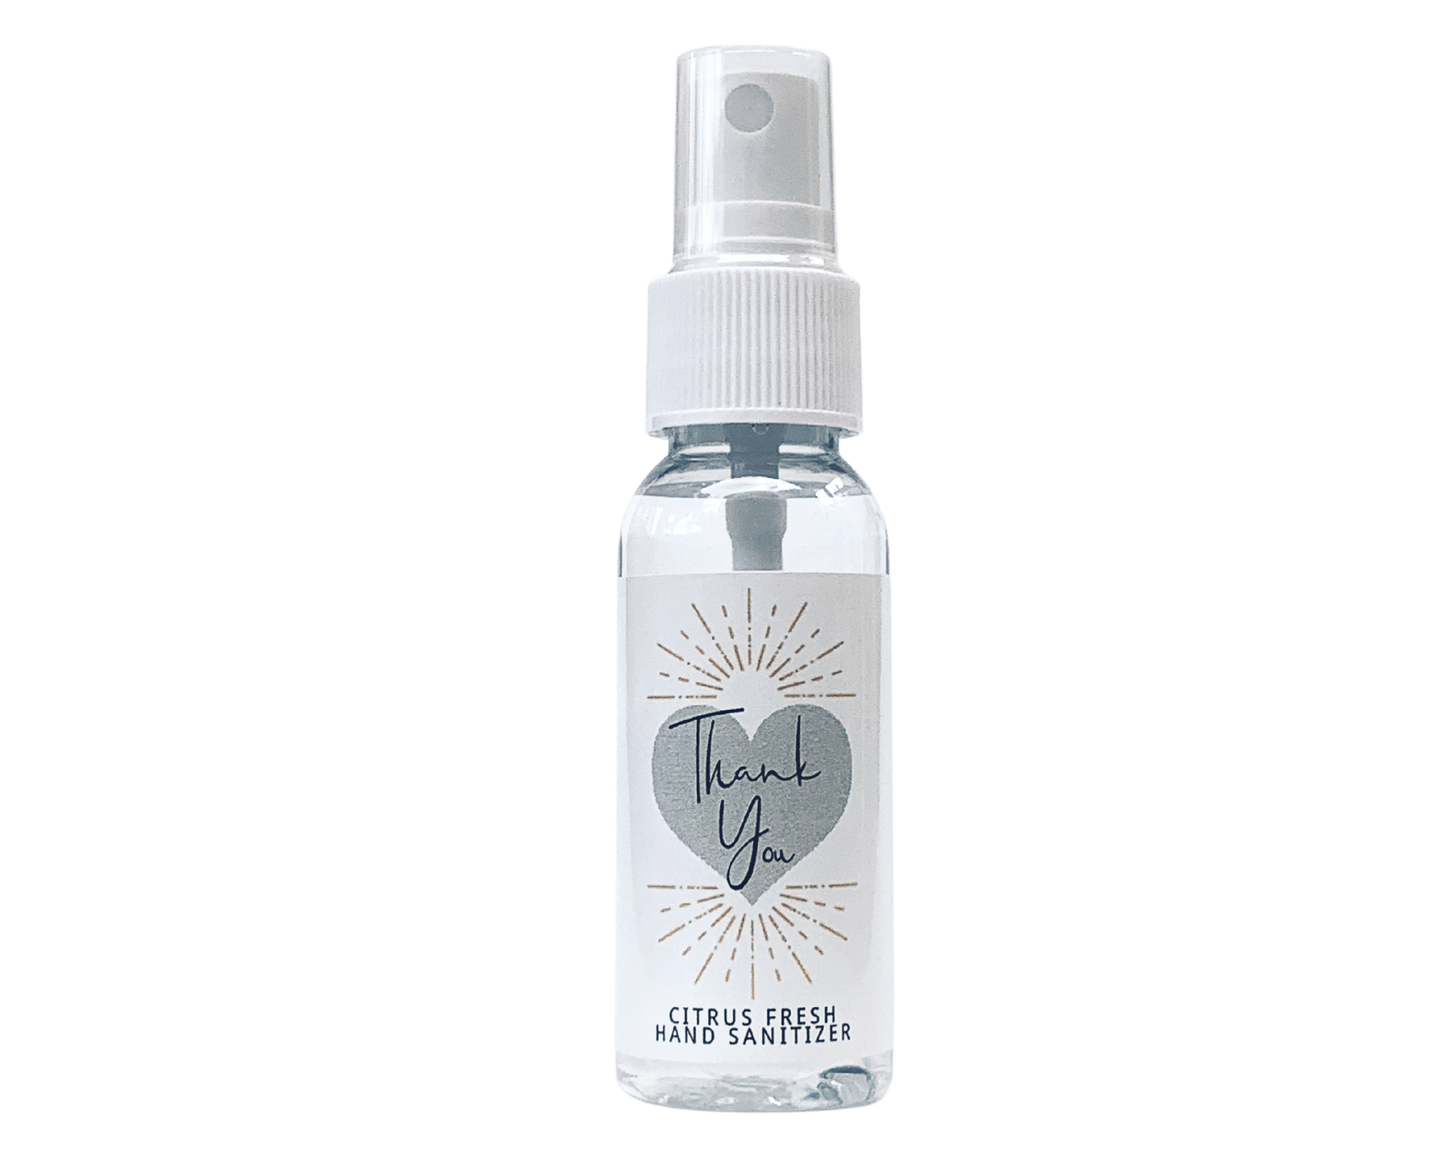 Hand Sanitizer Party Favor - Thank You Bursting Heart - with Aloe & Essential Oils by Sunshine & Sanitizer